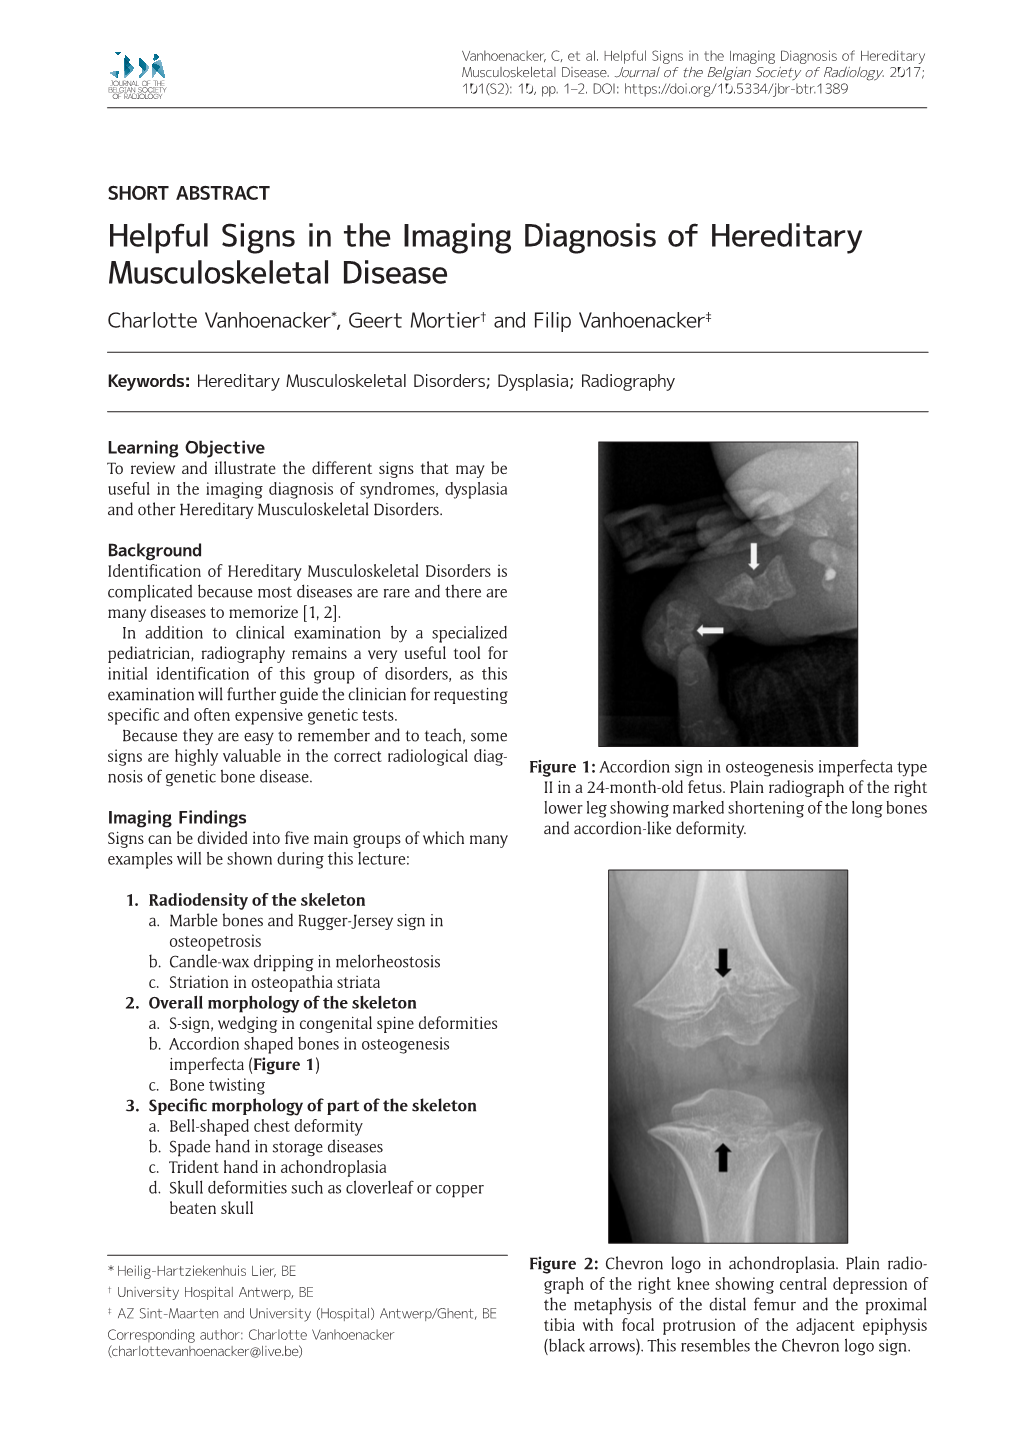 Helpful Signs in the Imaging Diagnosis of Hereditary Musculoskeletal Disease